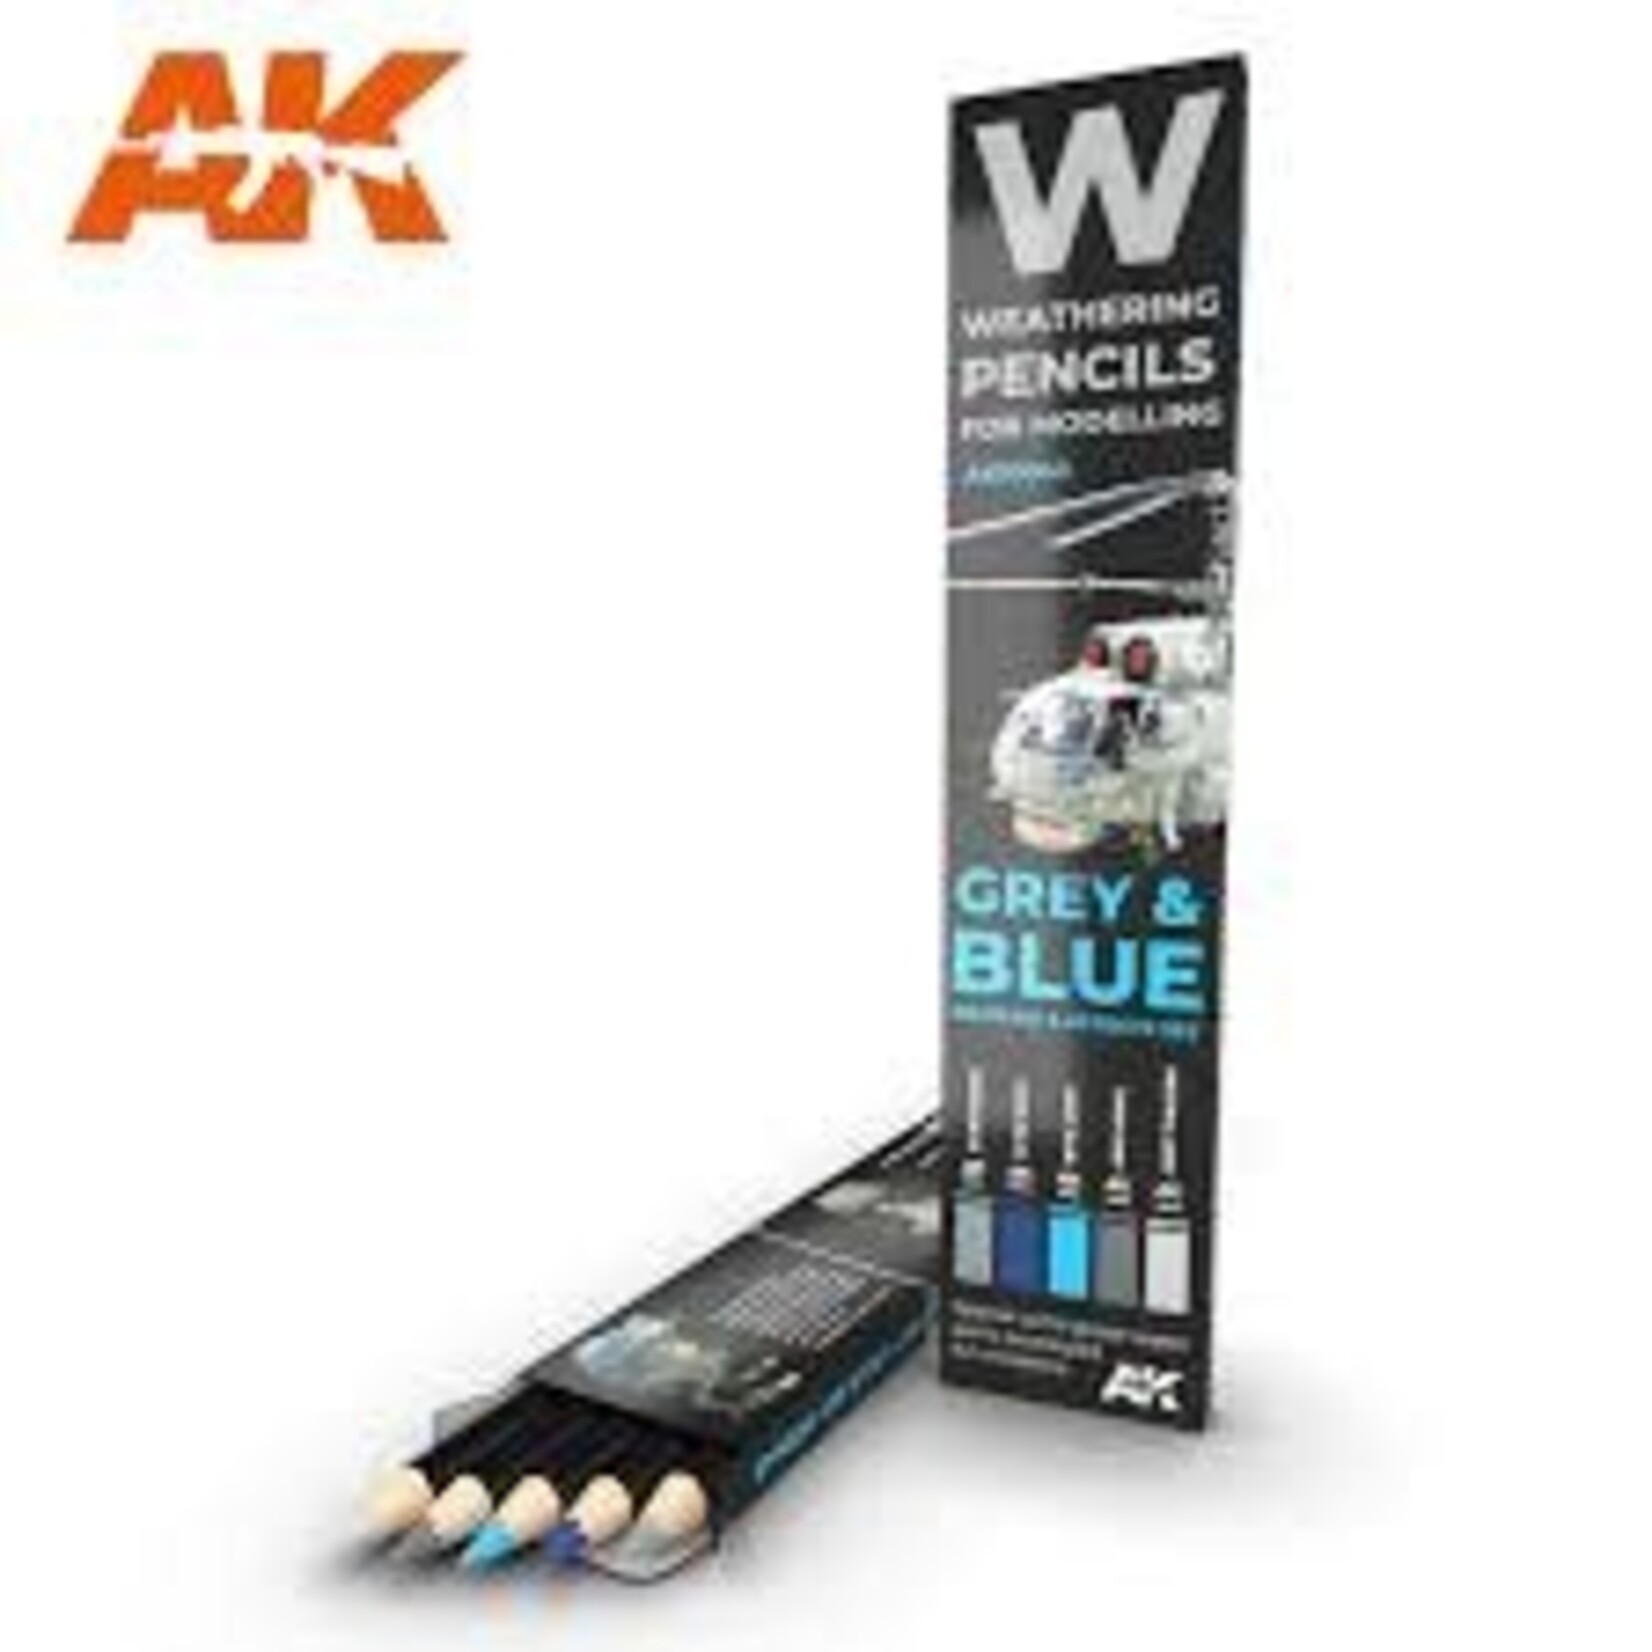 AK 10043 Weathering Pencils: Grey & Blue Shading & Effects Set (5 Colors)